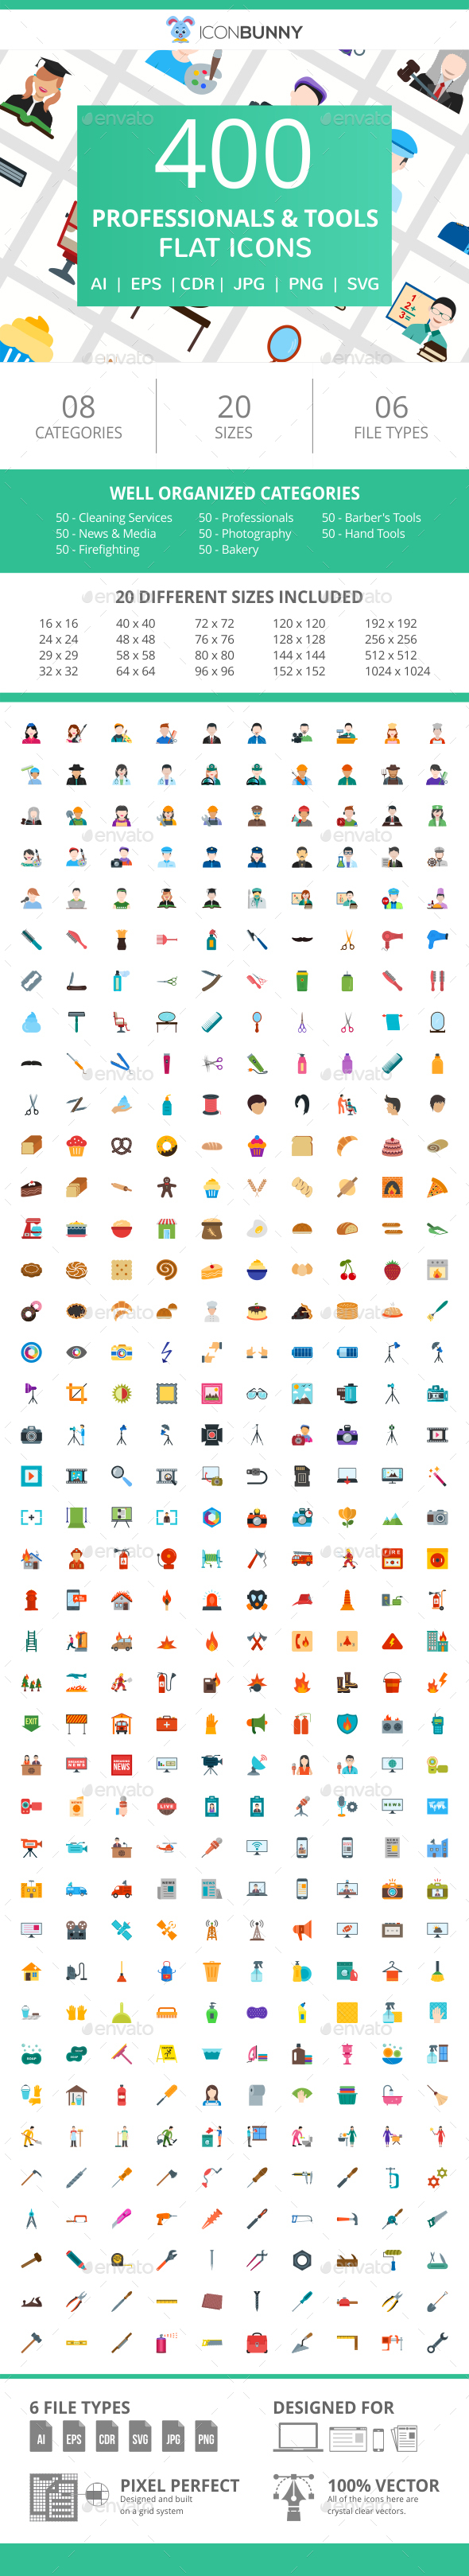 400 Professionals & Their Tools Flat Icons